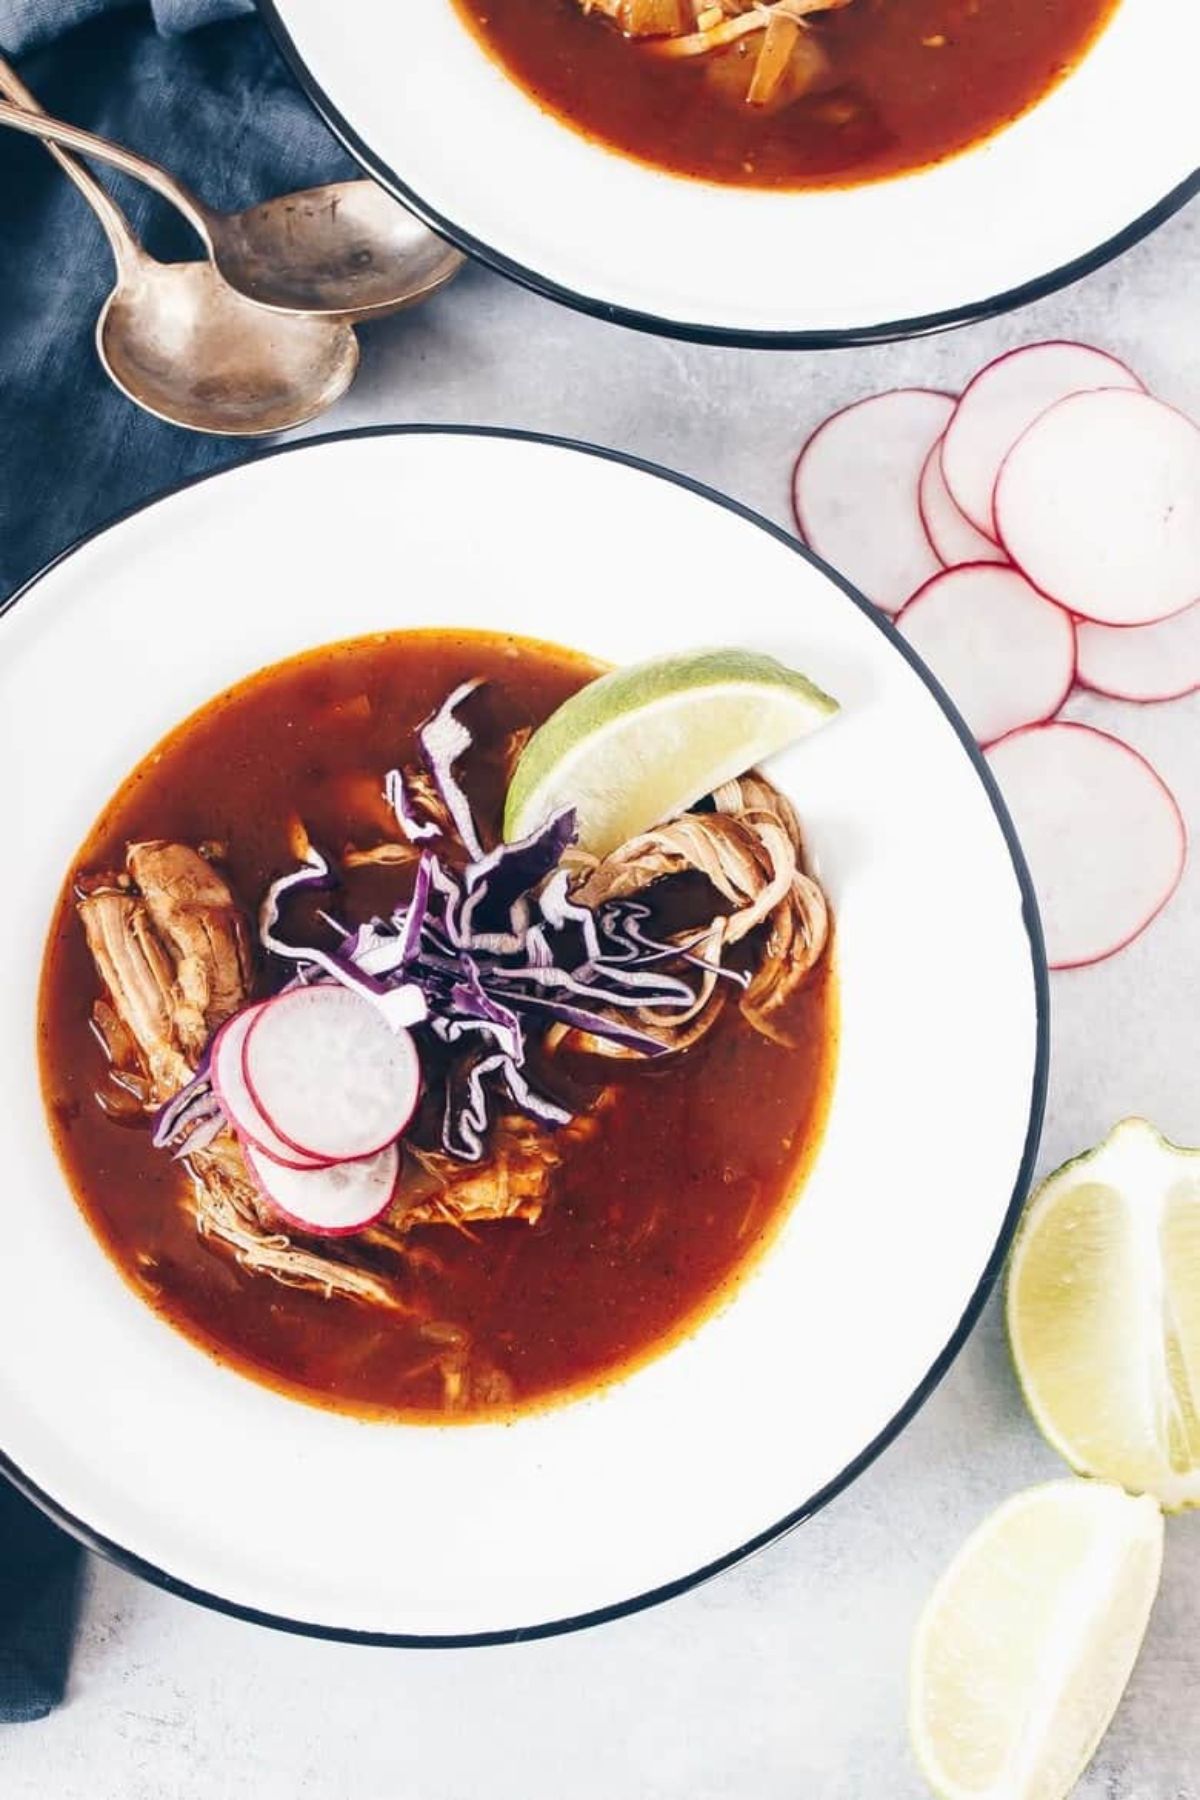 On a white table is sliced radish and lime wedges, with two silver spoons on the top left. A round white soup dish with a blue rim is filled with posole. Topped with sliced radish, sliced red cabbage and a lime wedge